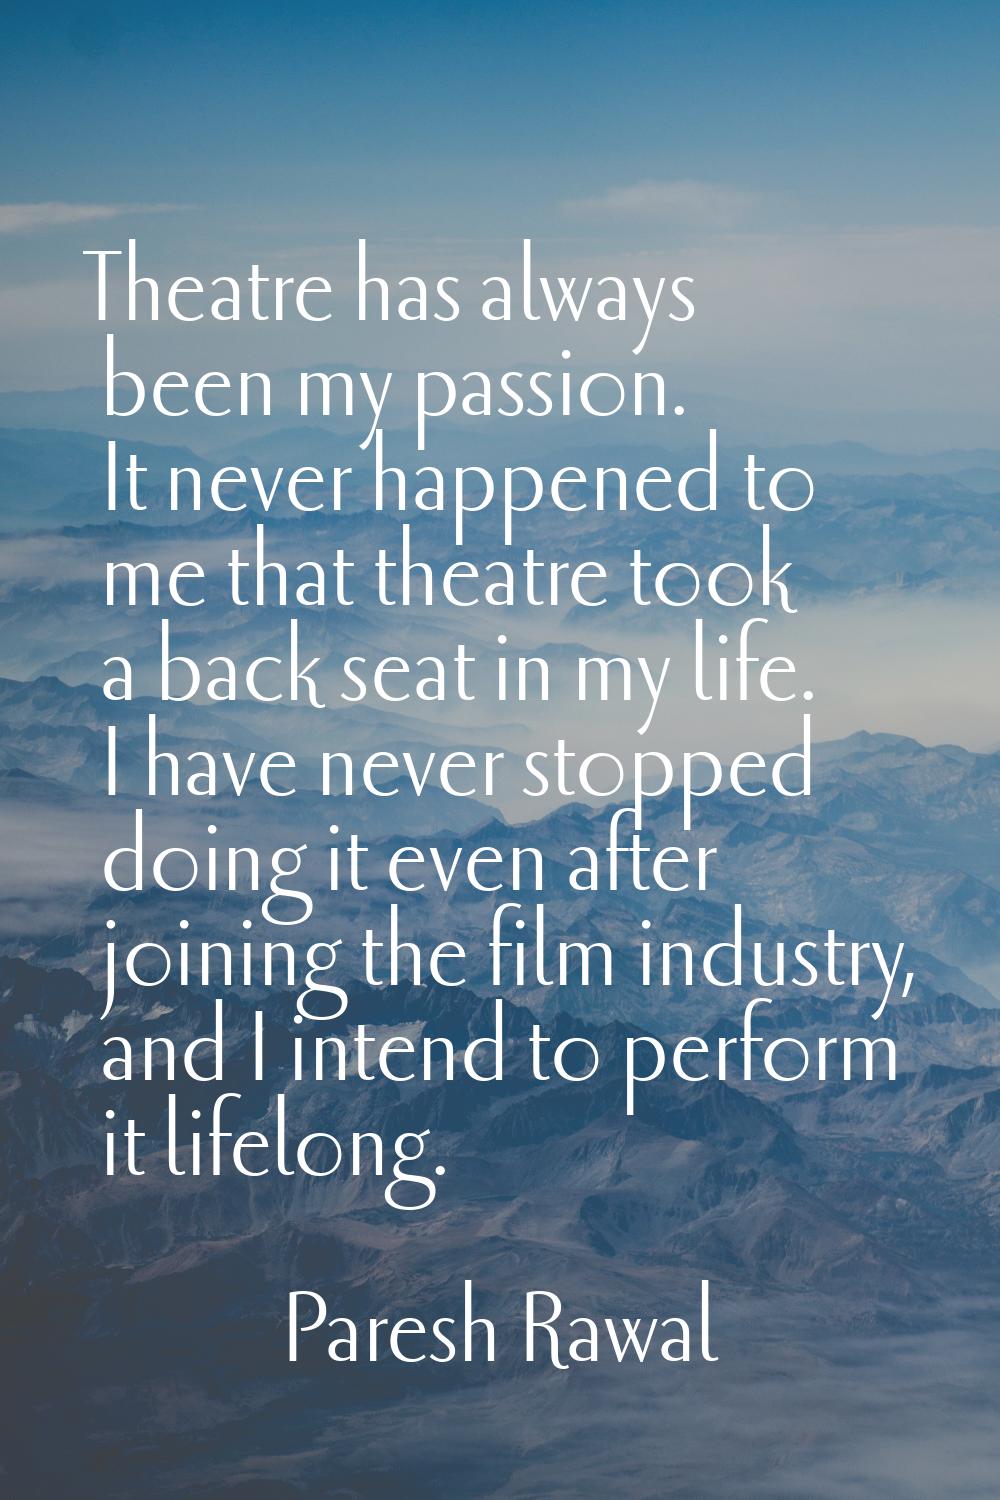 Theatre has always been my passion. It never happened to me that theatre took a back seat in my lif